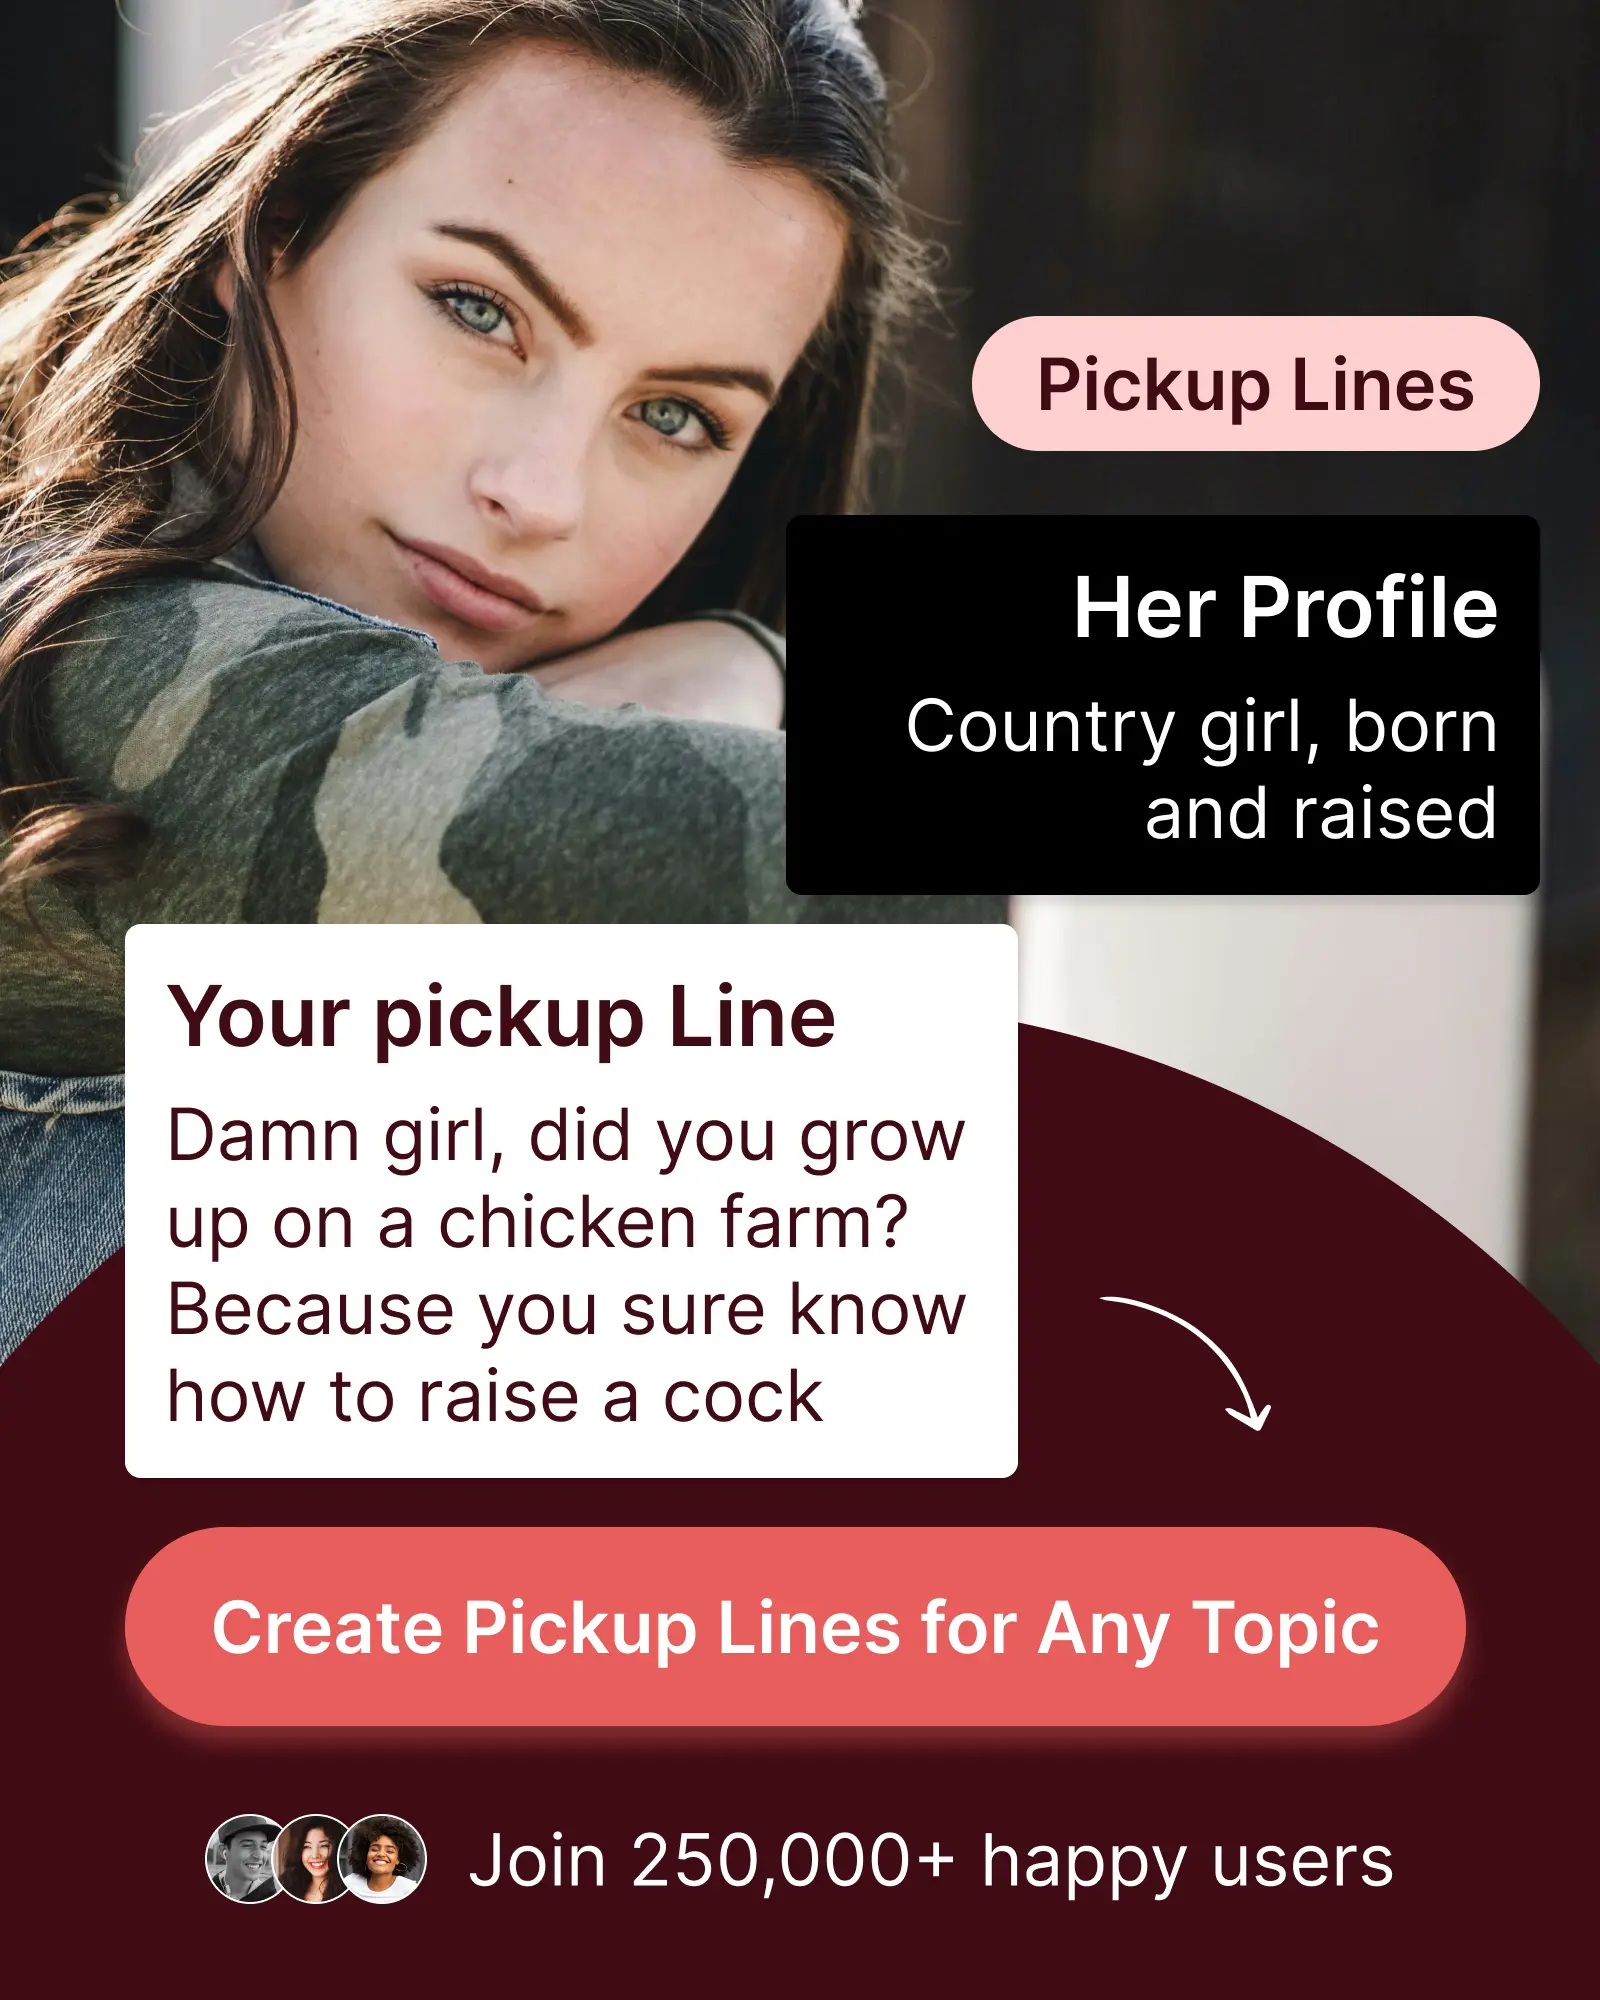 Dirty pickup lines for tinder